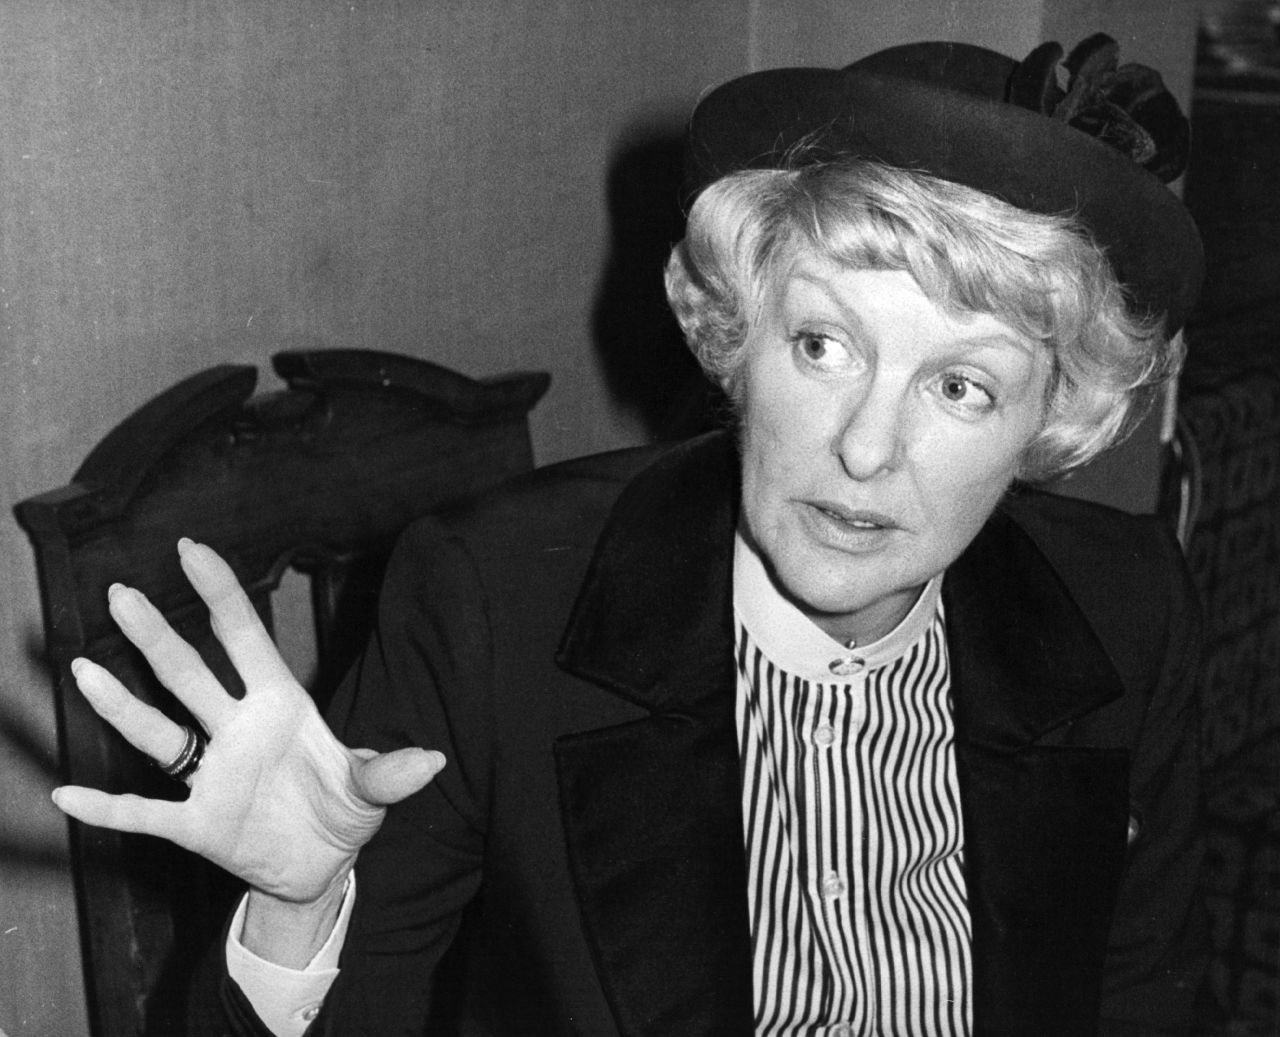 Broadway legend <a href="http://www.cnn.com/2014/07/17/showbiz/obit-actress-elaine-stritch/index.html" target="_blank">Elaine Stritch</a> died July 17. According to her longtime friend Julie Keyes, Stritch died at her home in Birmingham, Michigan, surrounded by her family. She was 89 years old.